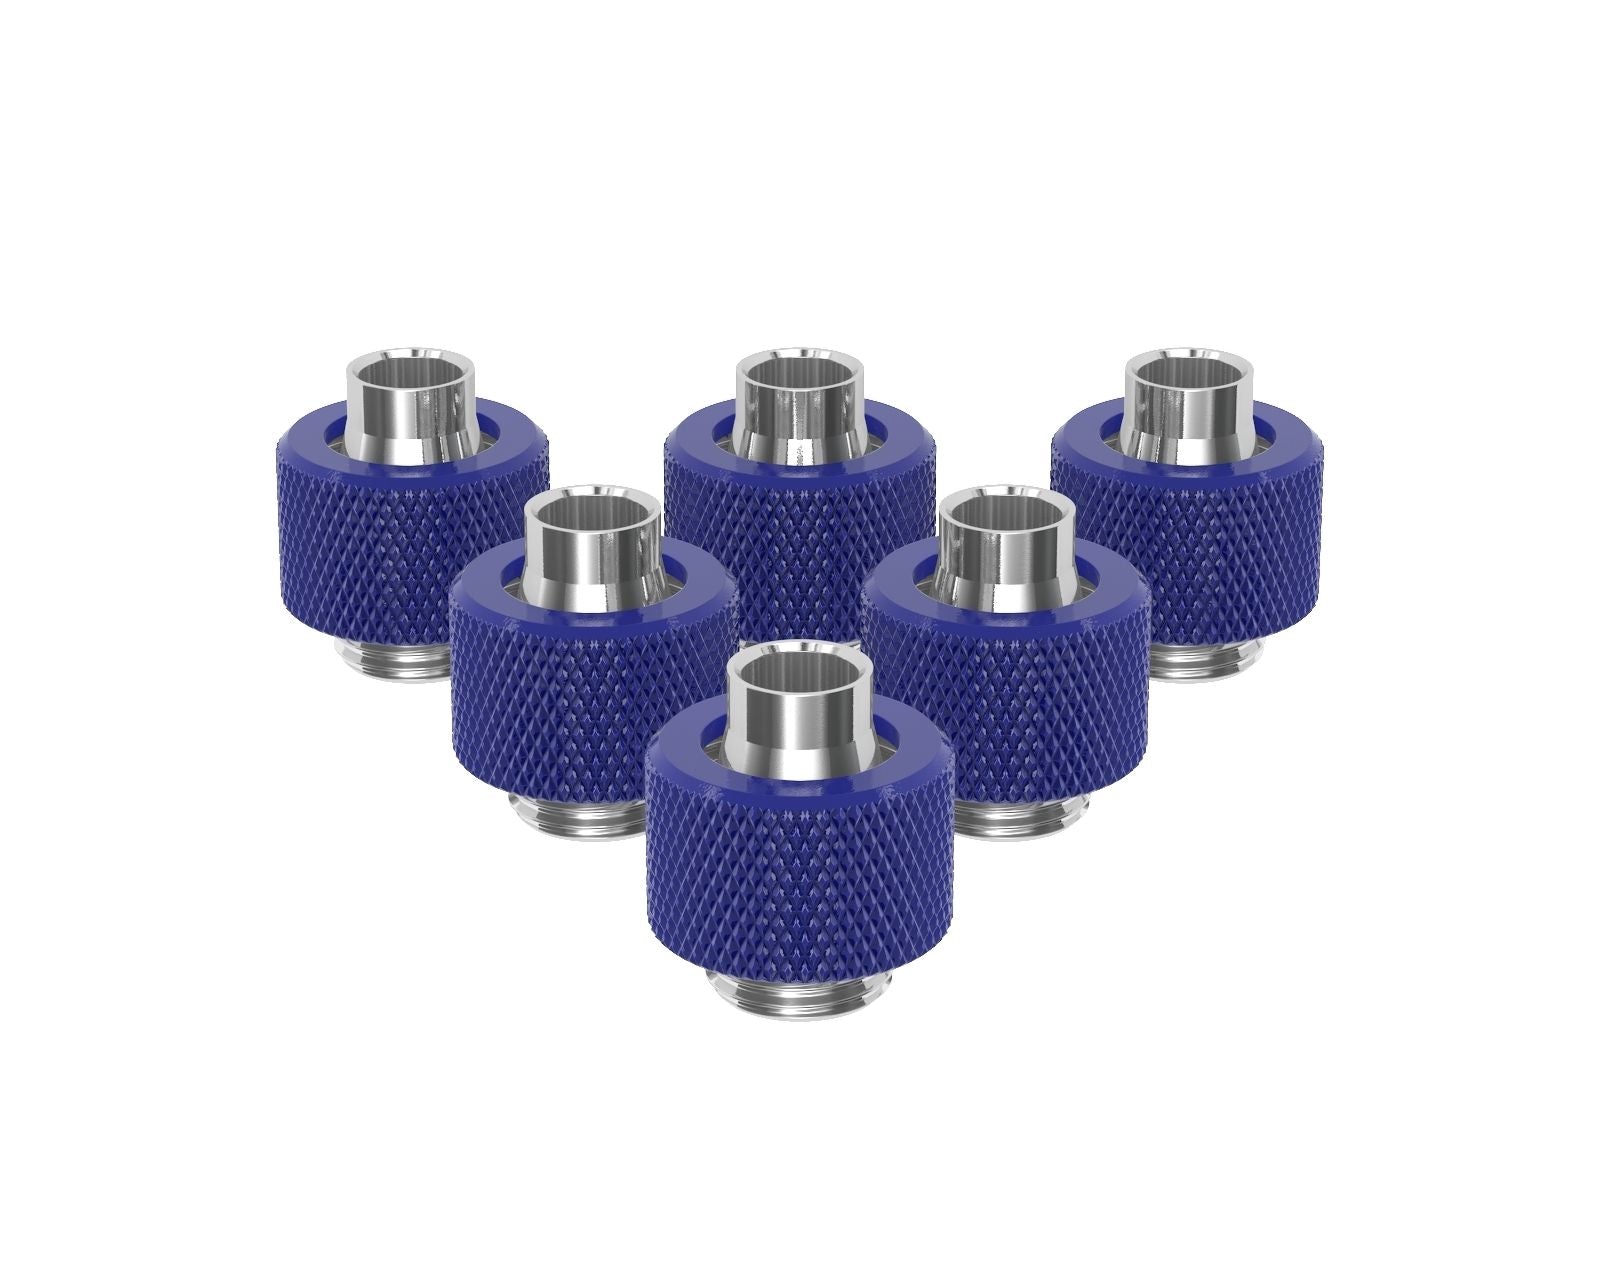 PrimoChill SecureFit SX - Premium Compression Fitting For 3/8in ID x 1/2in OD Flexible Tubing 6 Pack (F-SFSX12-6) - Available in 20+ Colors, Custom Watercooling Loop Ready - True Blue